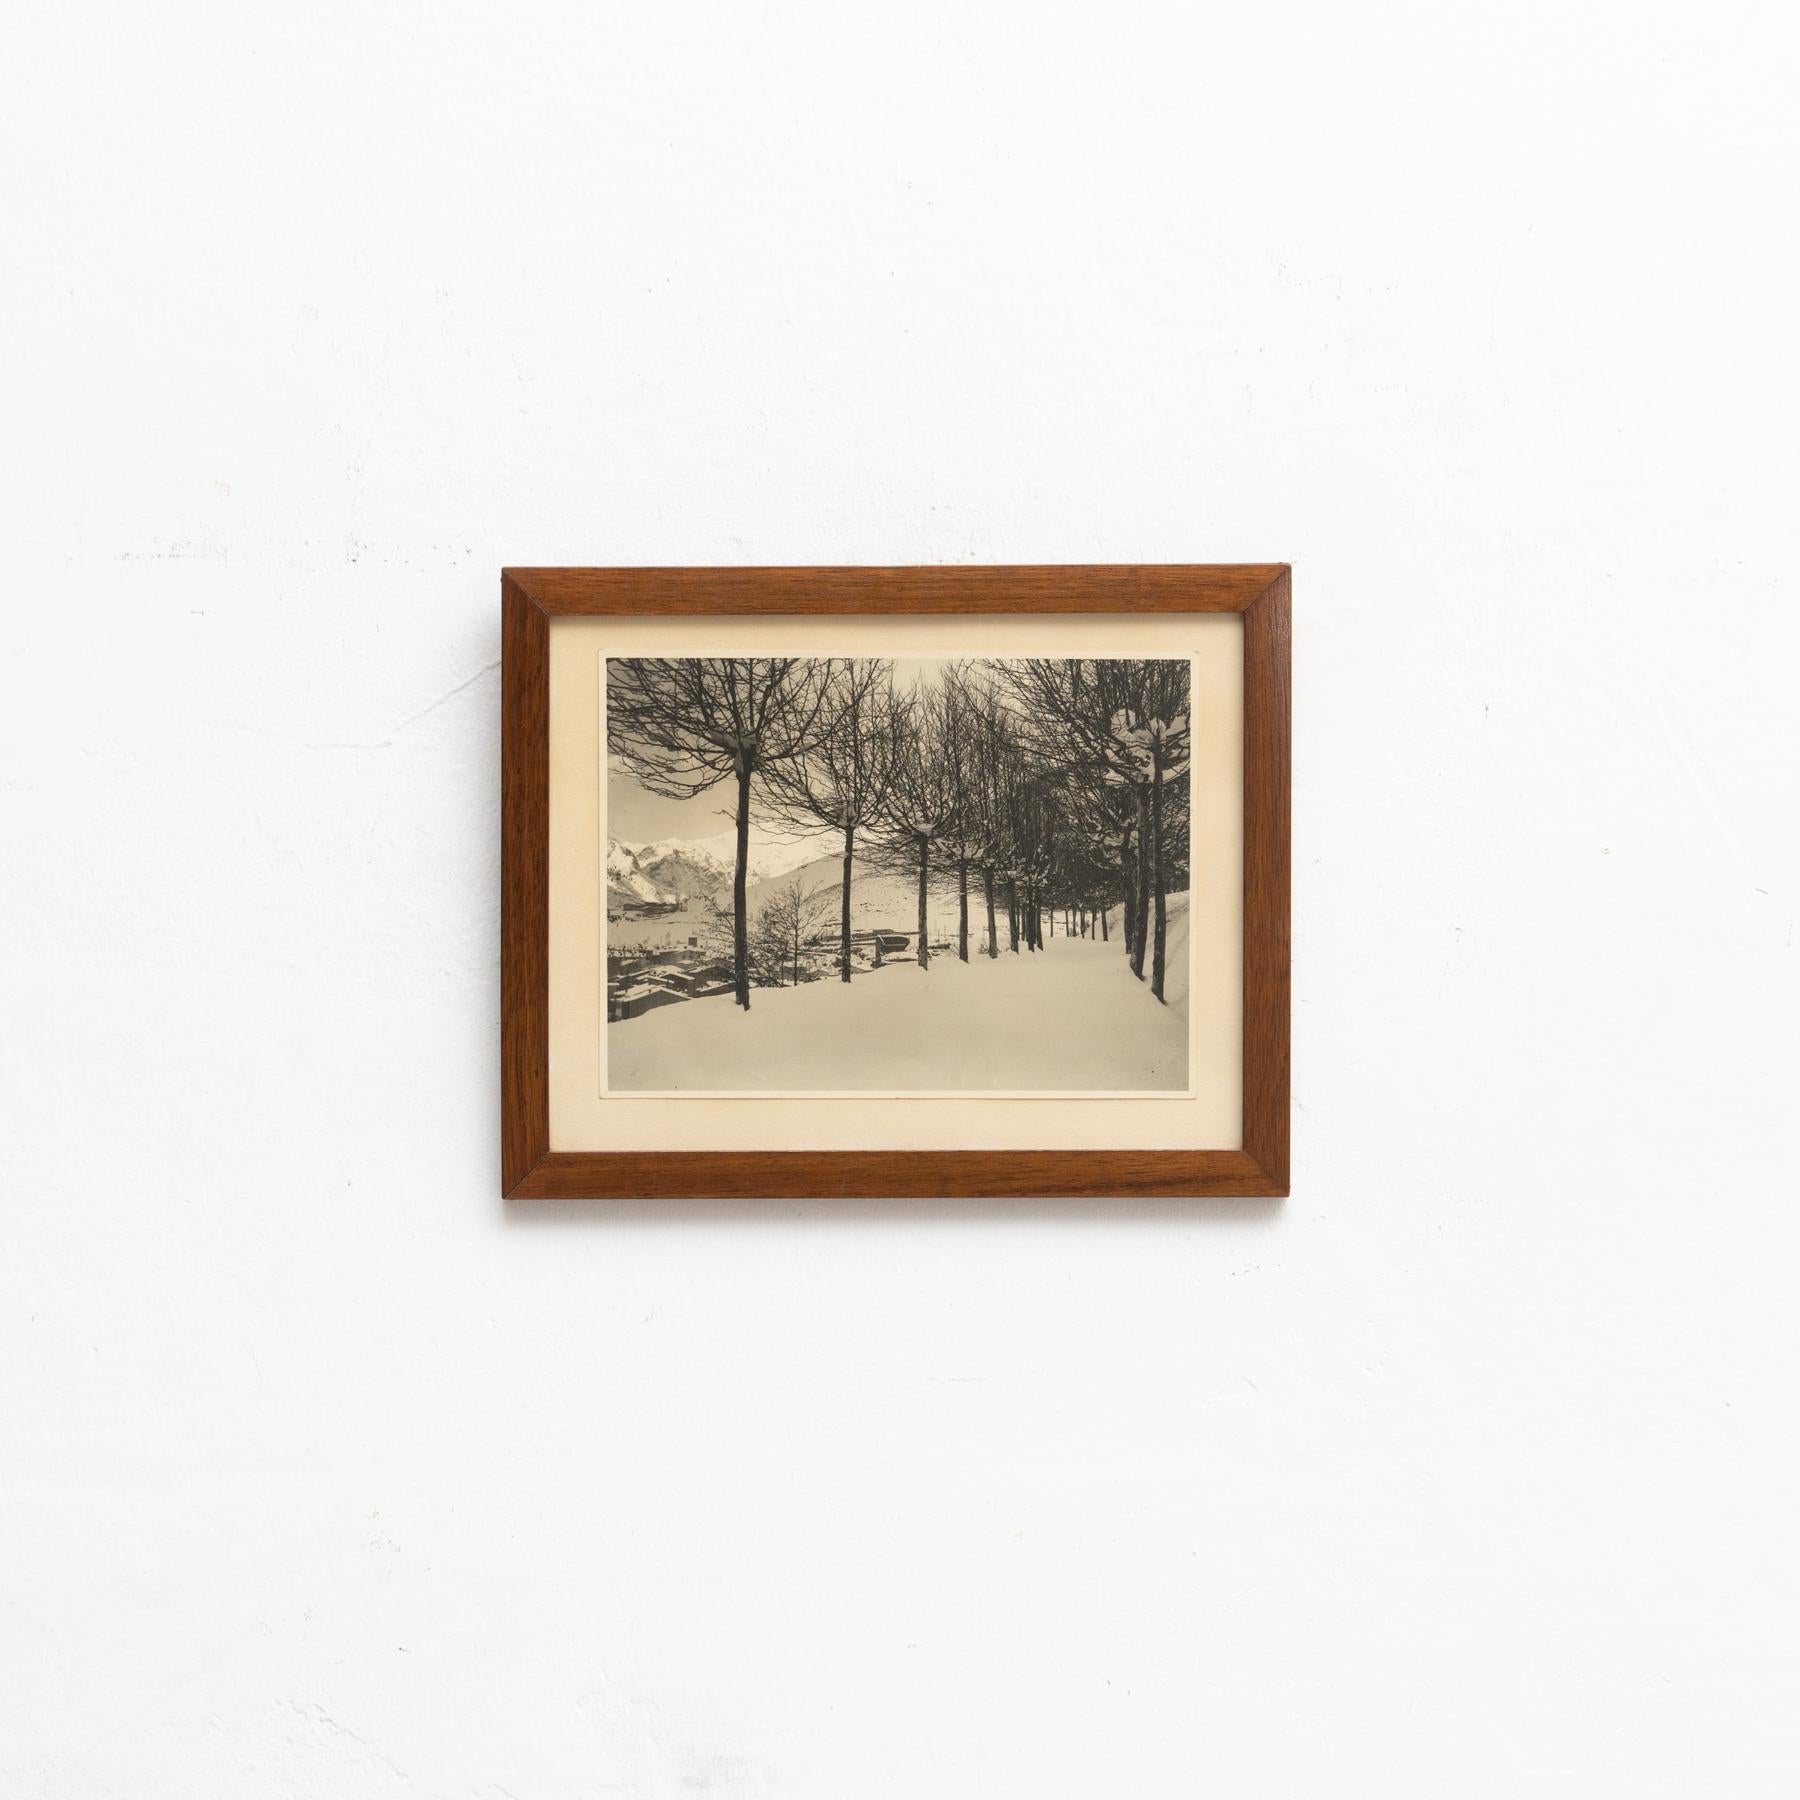 Unsigned photography.

Framed.

Made by unknown artist in Spain, circa 1960.

In original condition, with minor wear consistent with age and use, preserving a beautiful patina.

Materials:
Photographic paper.

 